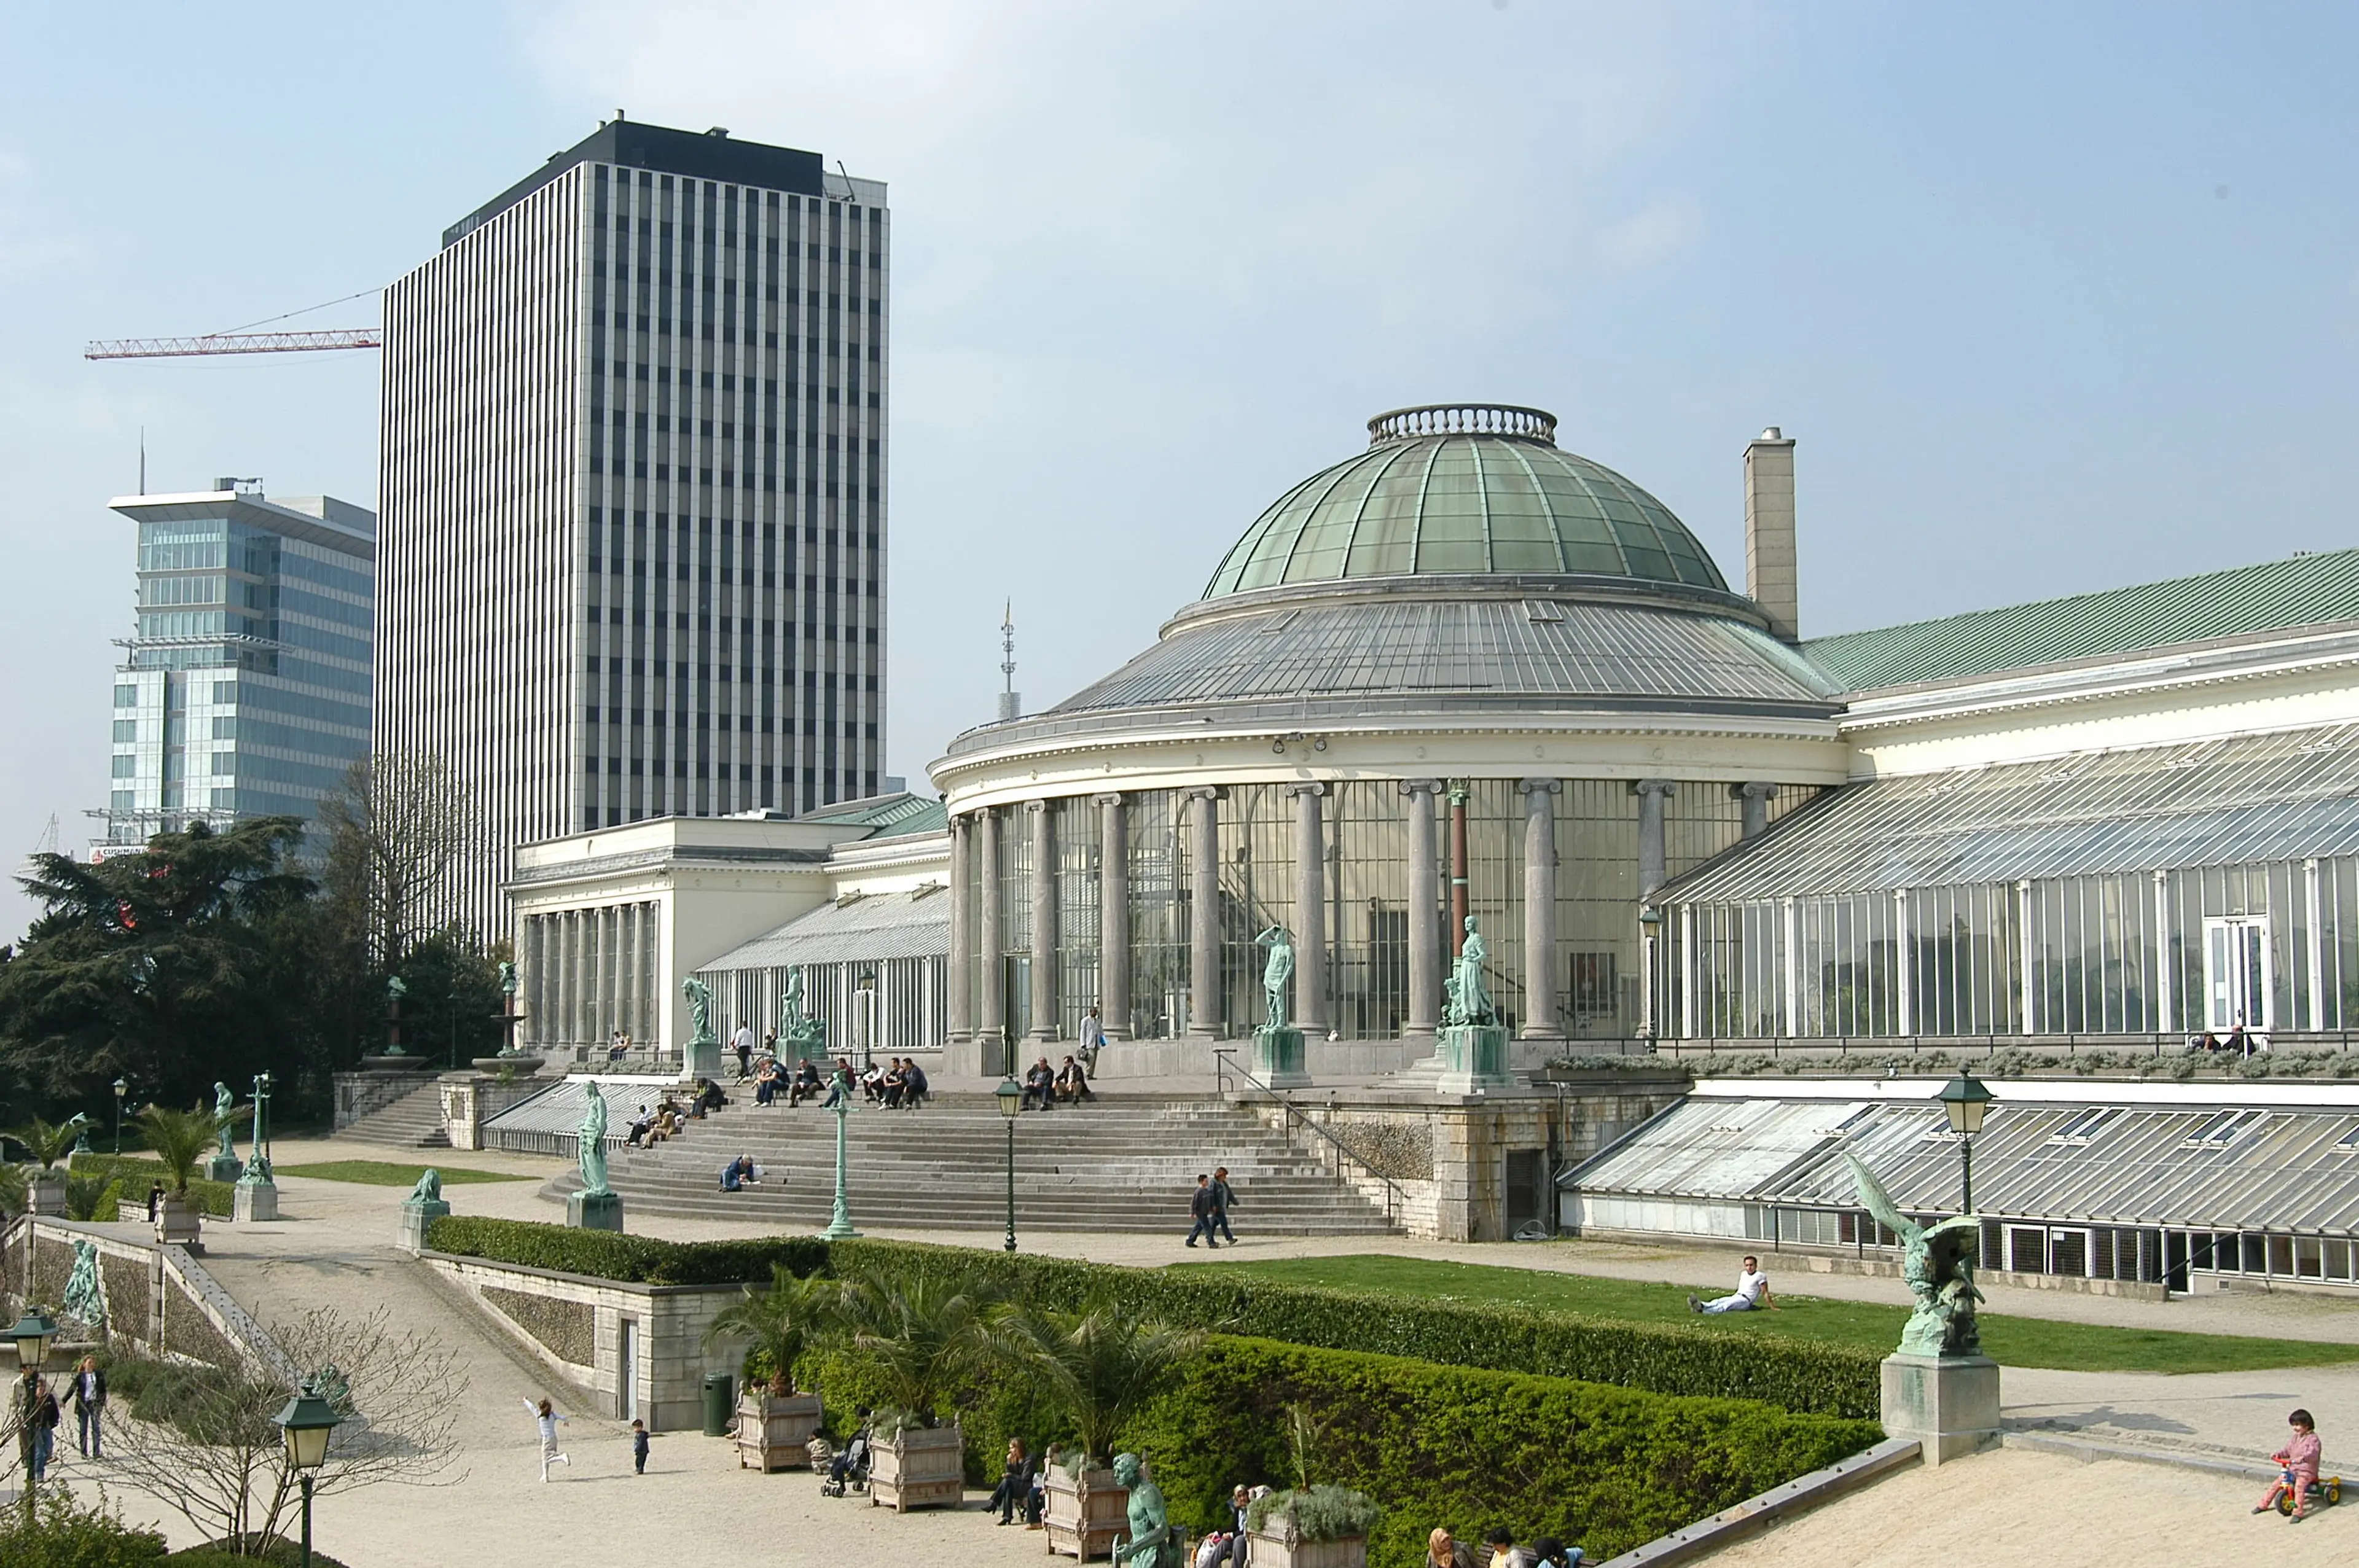 3-Day Family Adventure: Outdoor and Sightseeing in Brussels